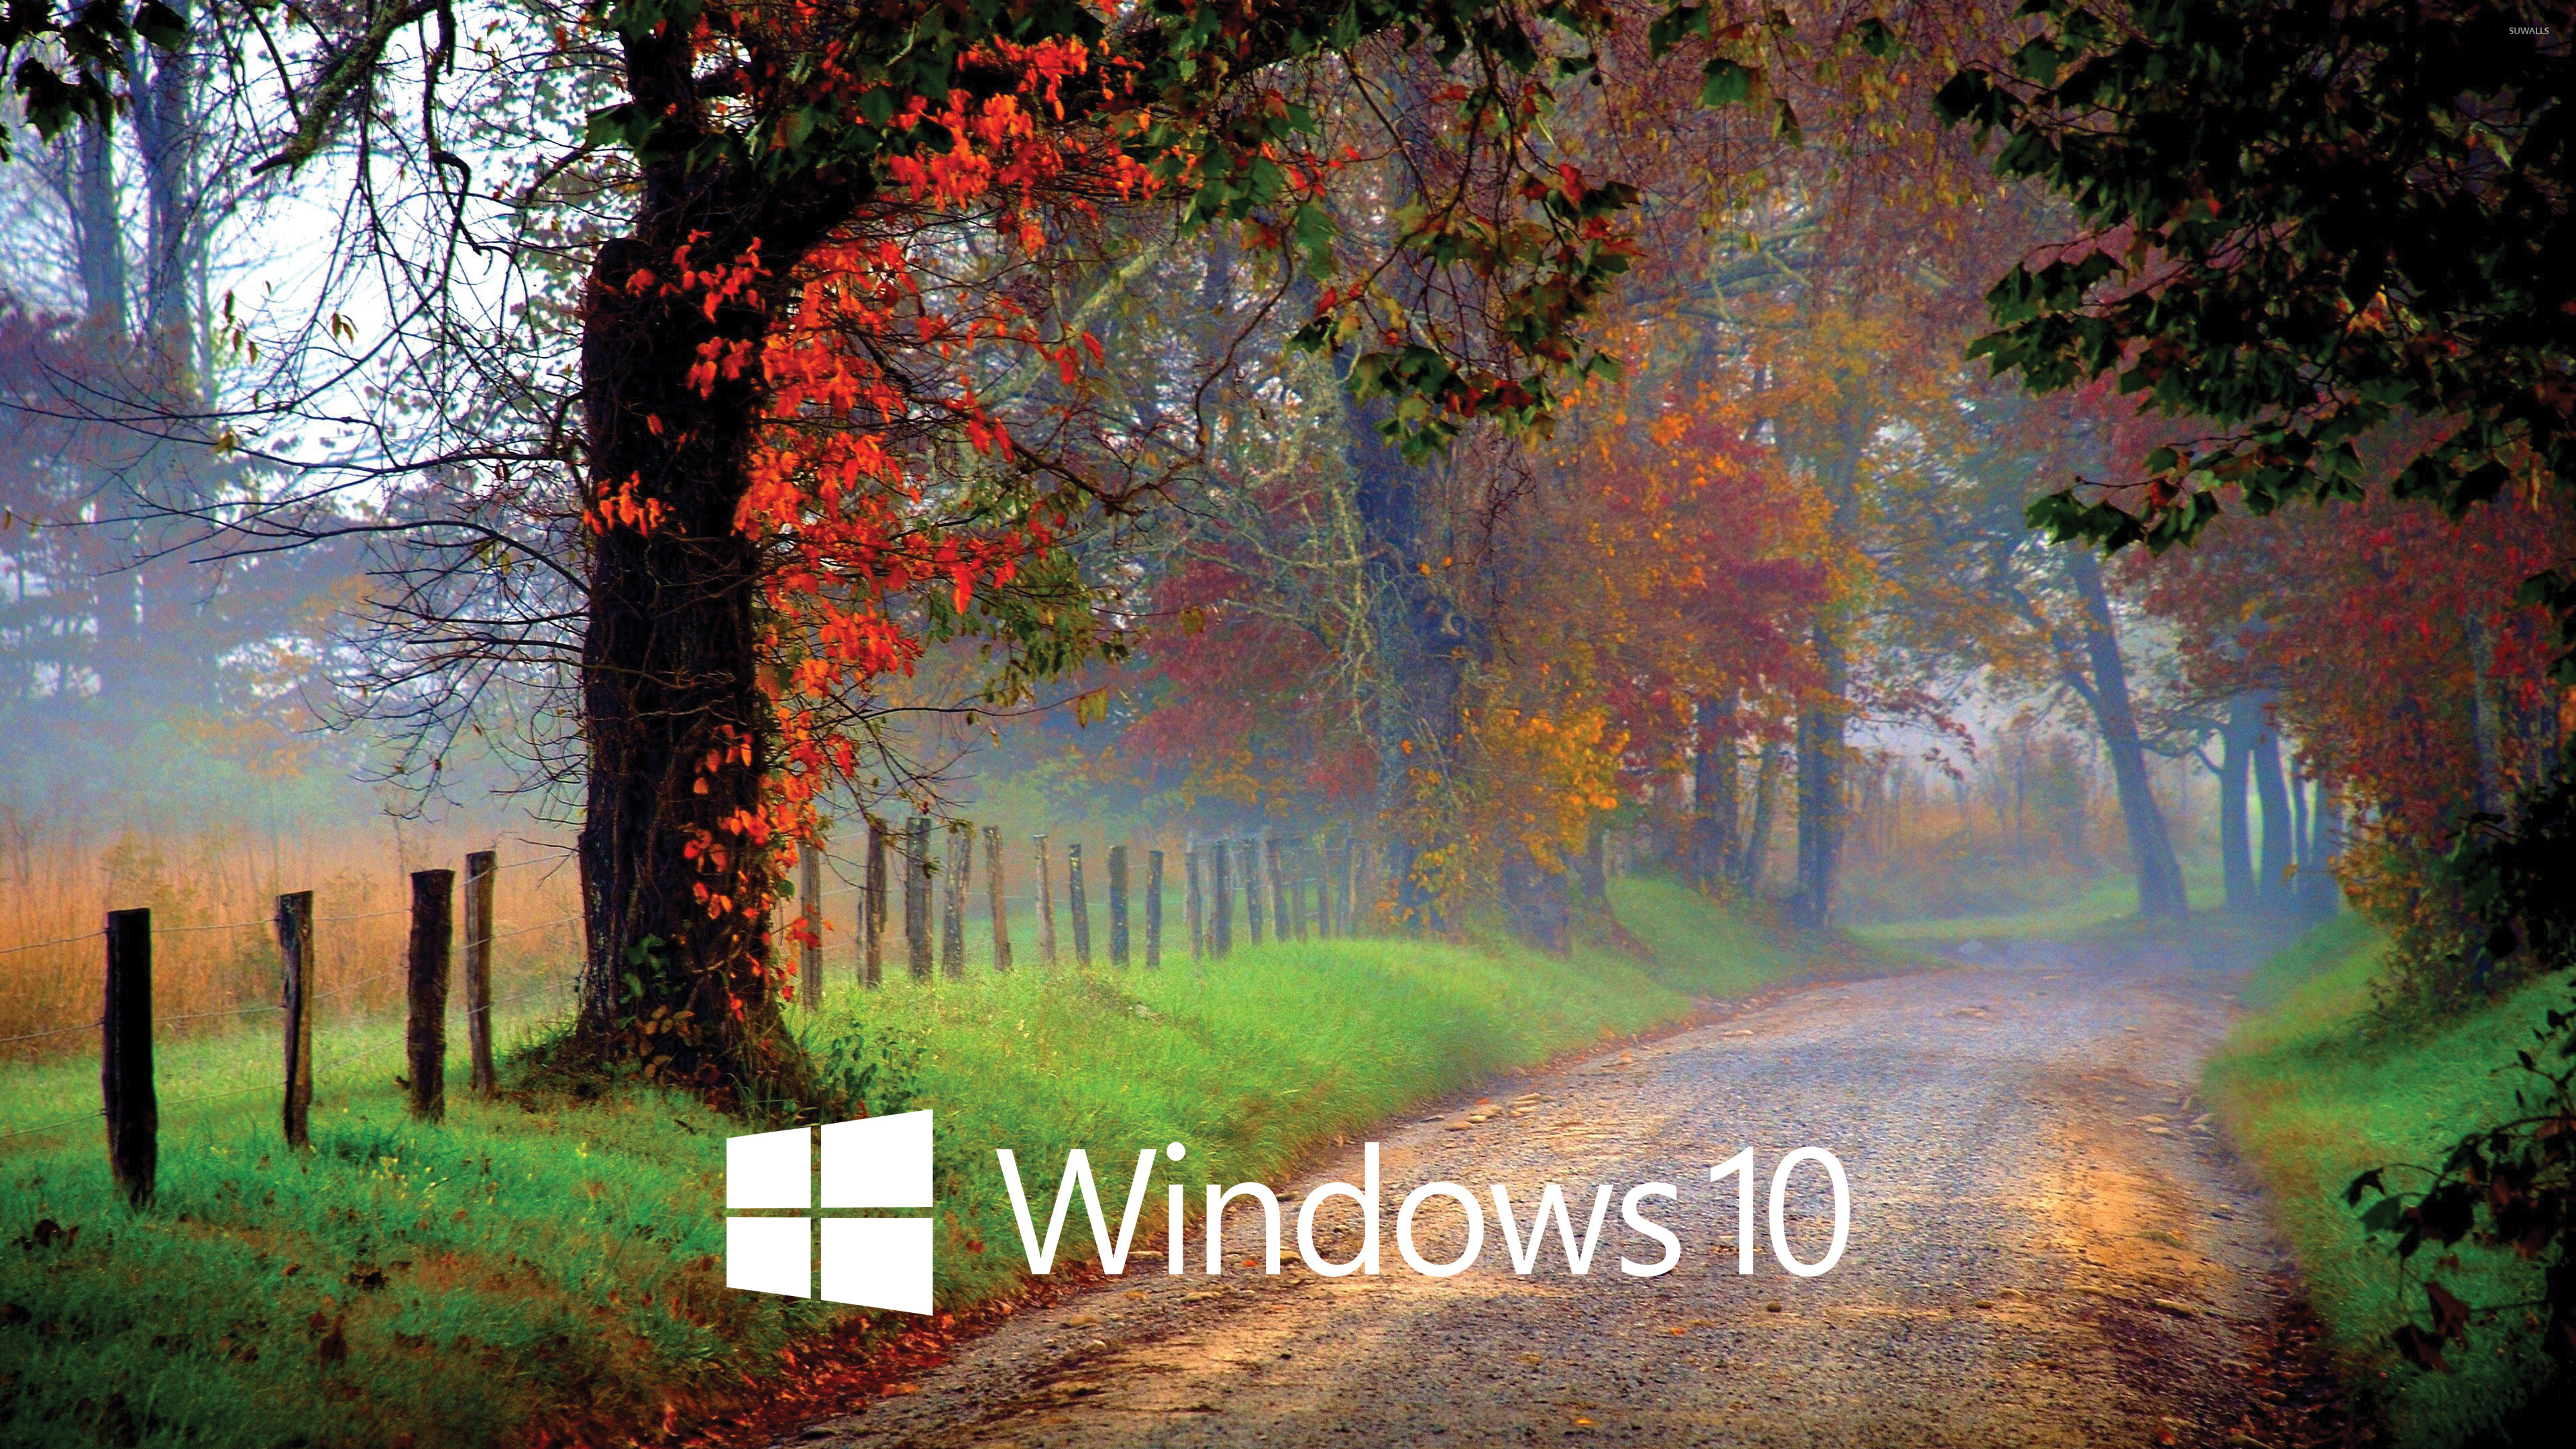 Windows 10 white text logo on the forest path wallpaper - Computer ...